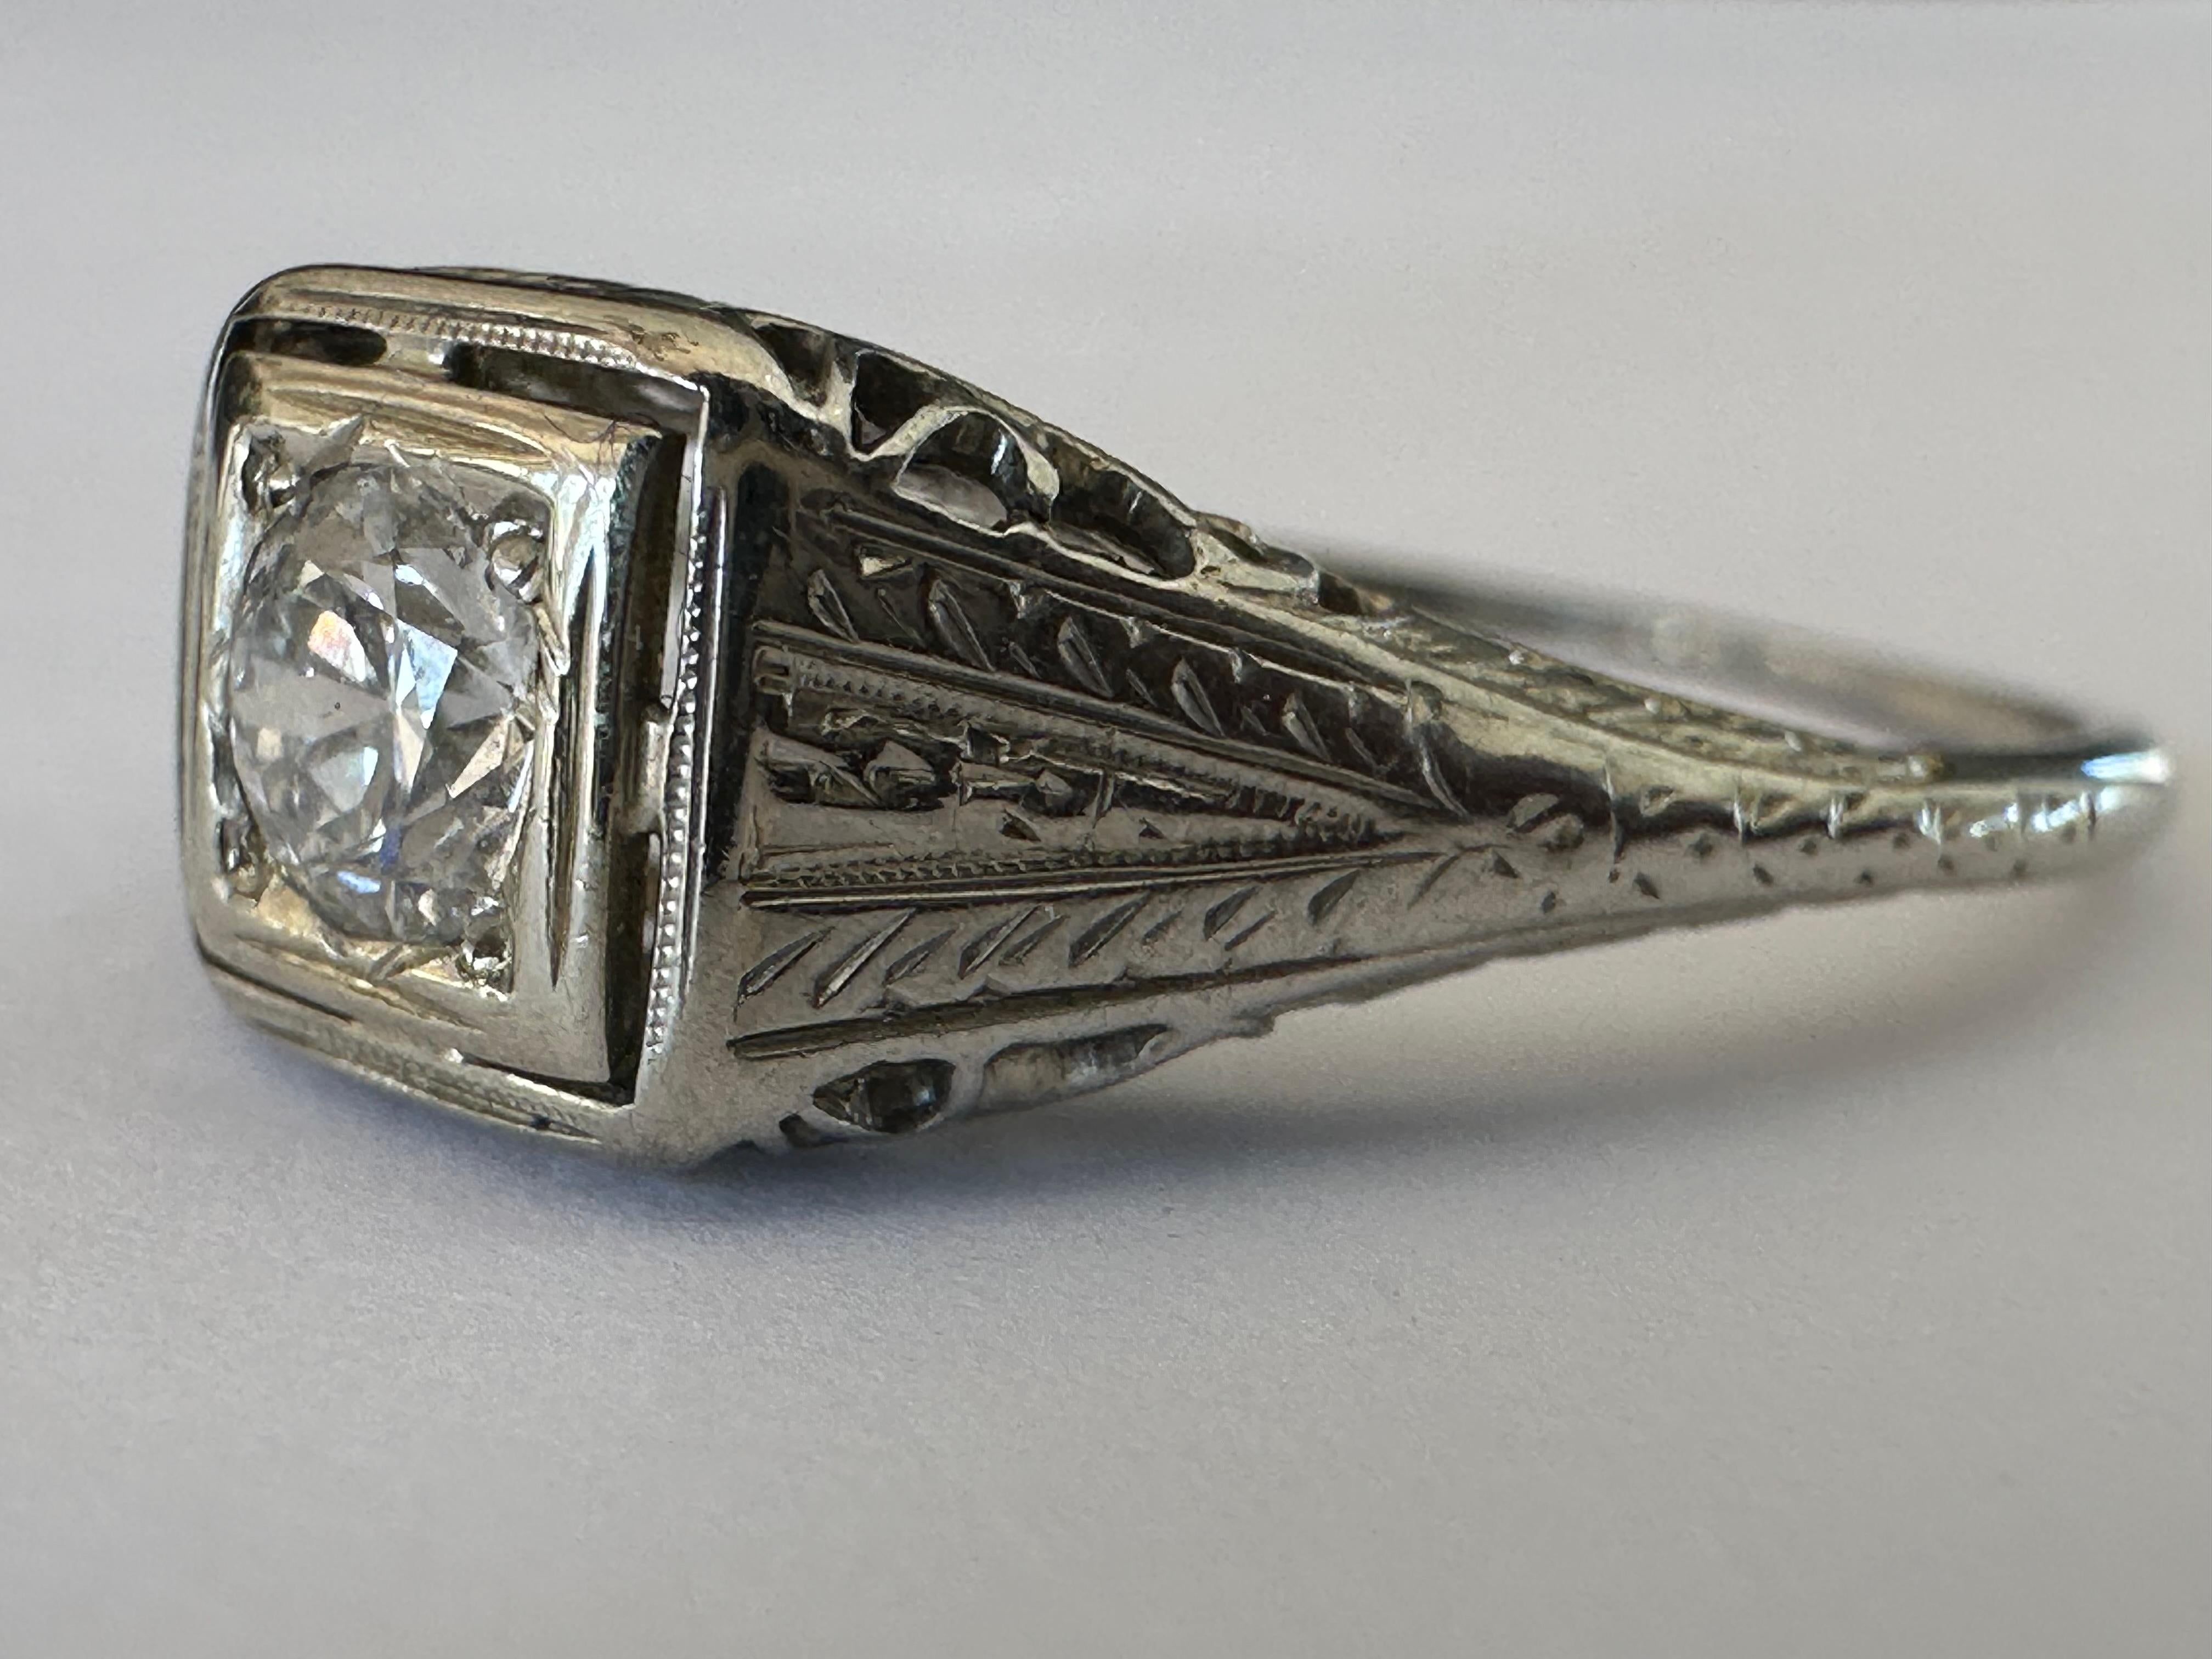 This striking Art Deco band is meticulously crafted from 18k white gold with fine filigree details and set with an Old European cut diamond measuring approximately 0.28 carats, FG color, VS2 clarity. 
